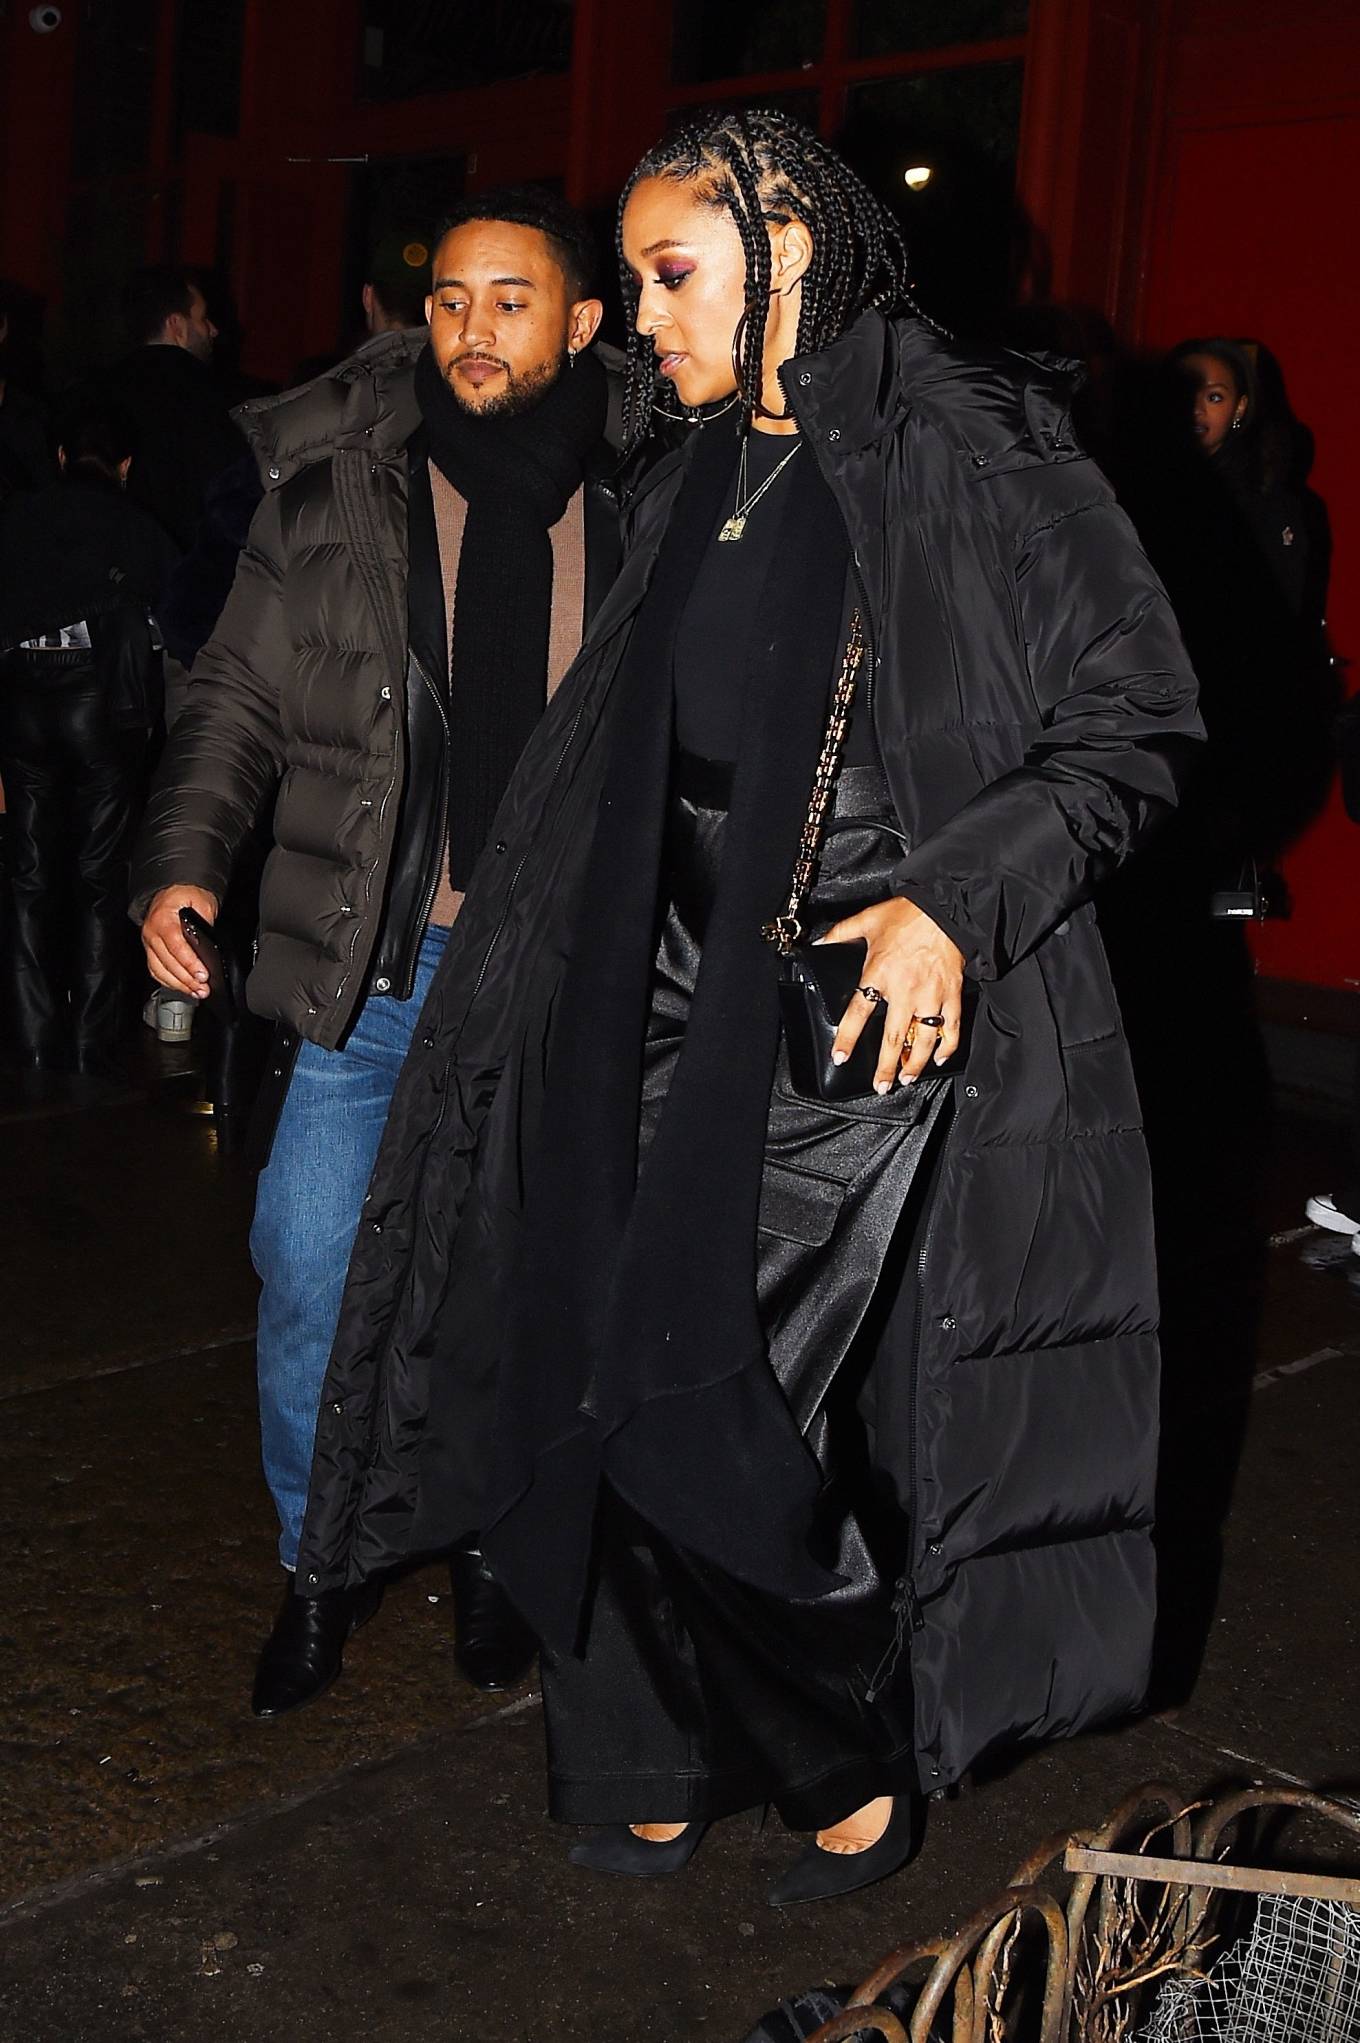 Tia Mowry - With brother Tahj Mowry on a dinner at Acme restaurant in New York